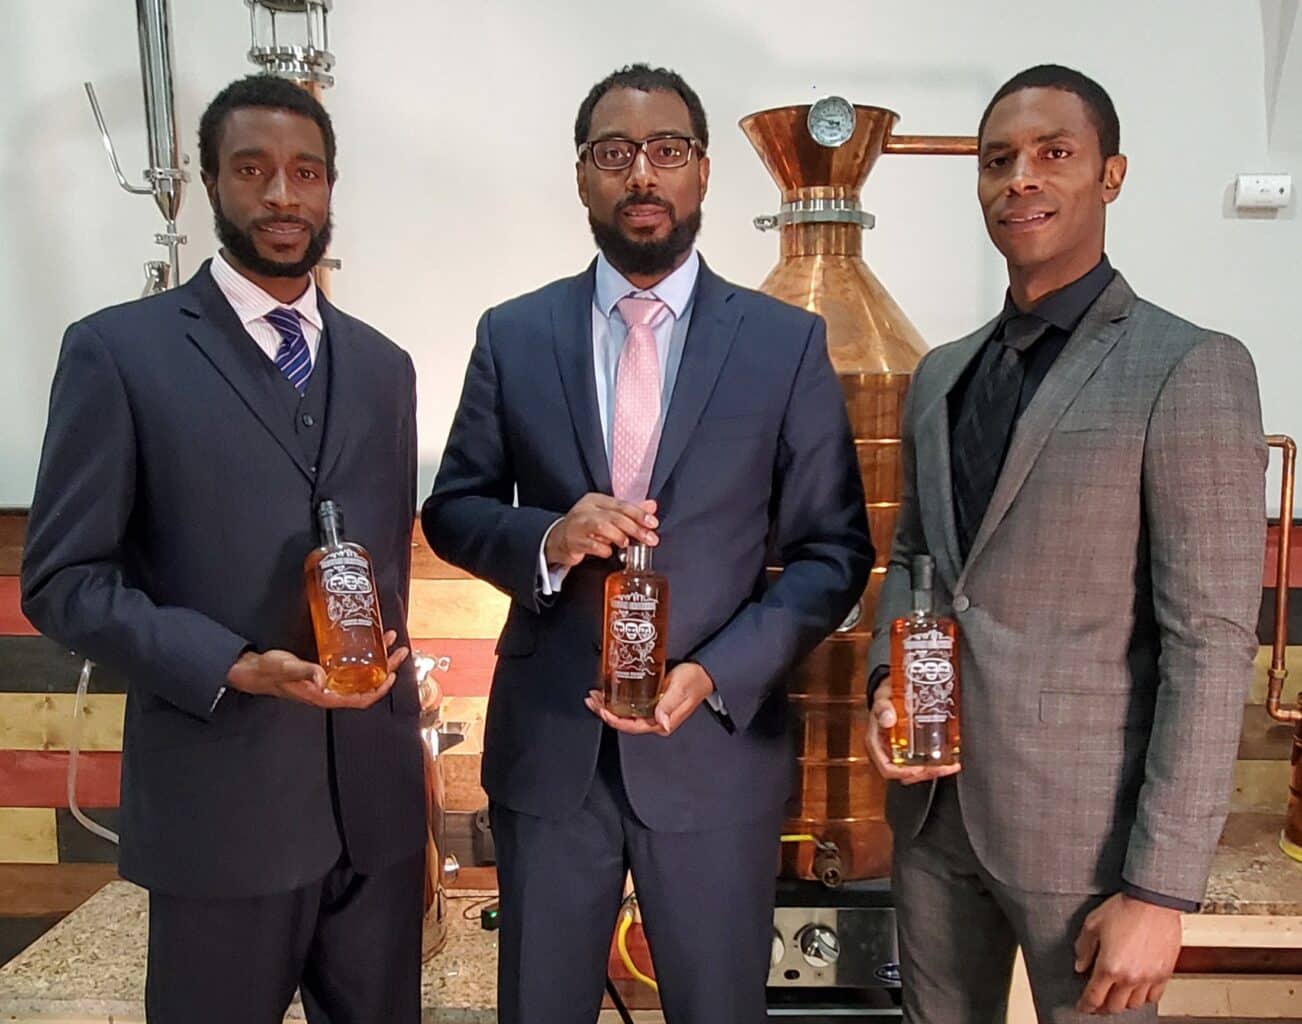 Christian, Victor, Bryson Yarbrough of Brough Brothers bourbon